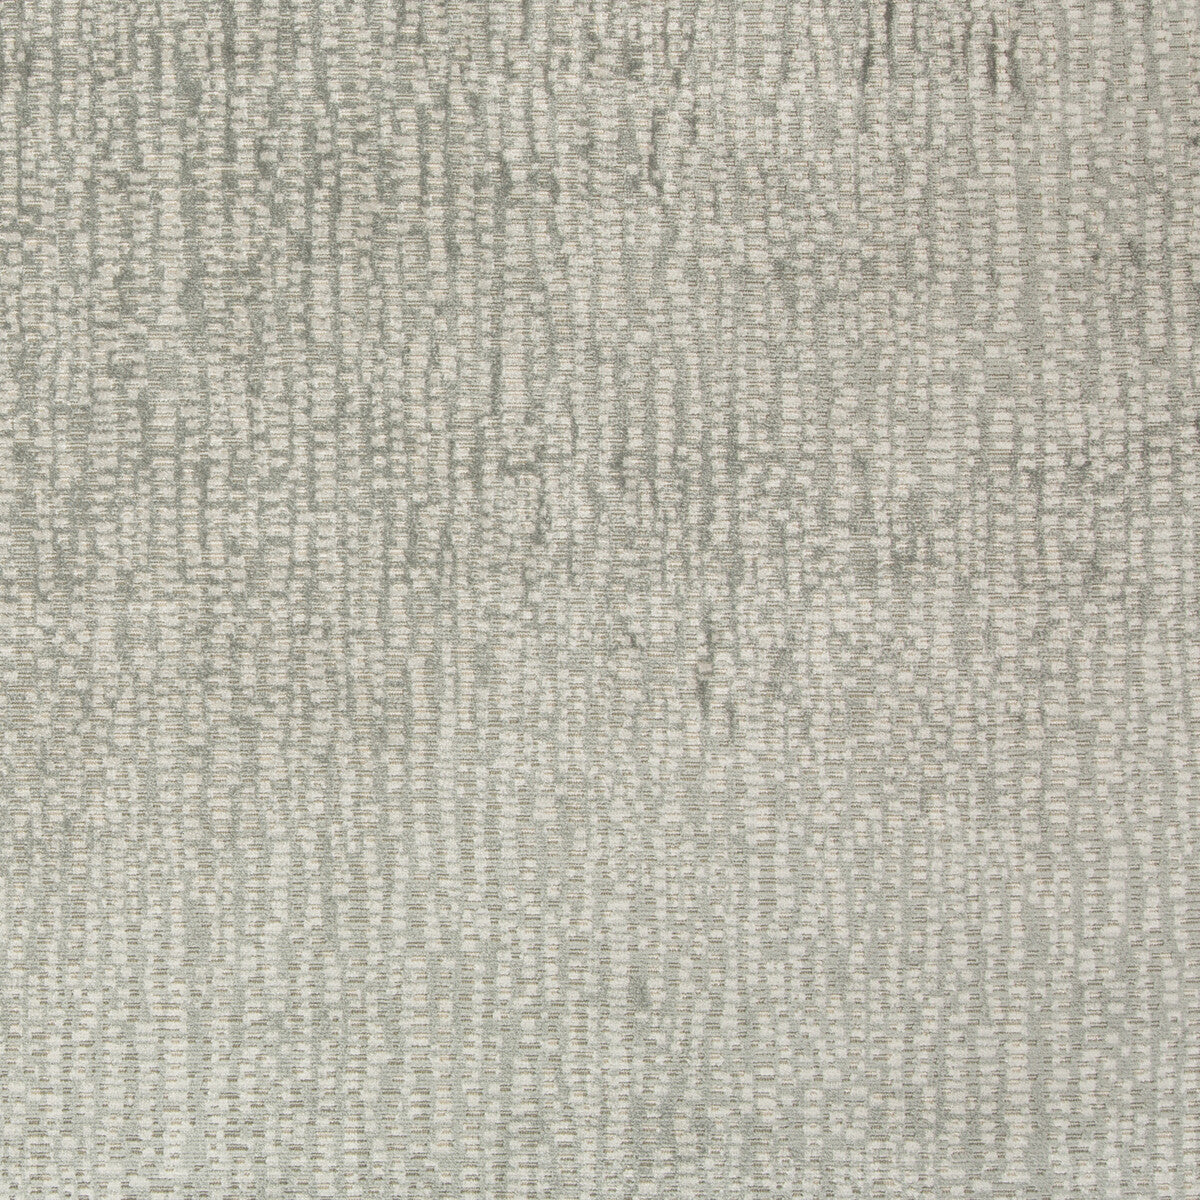 Stepping Stones fabric in platinum color - pattern 34788.11.0 - by Kravet Couture in the Artisan Velvets collection